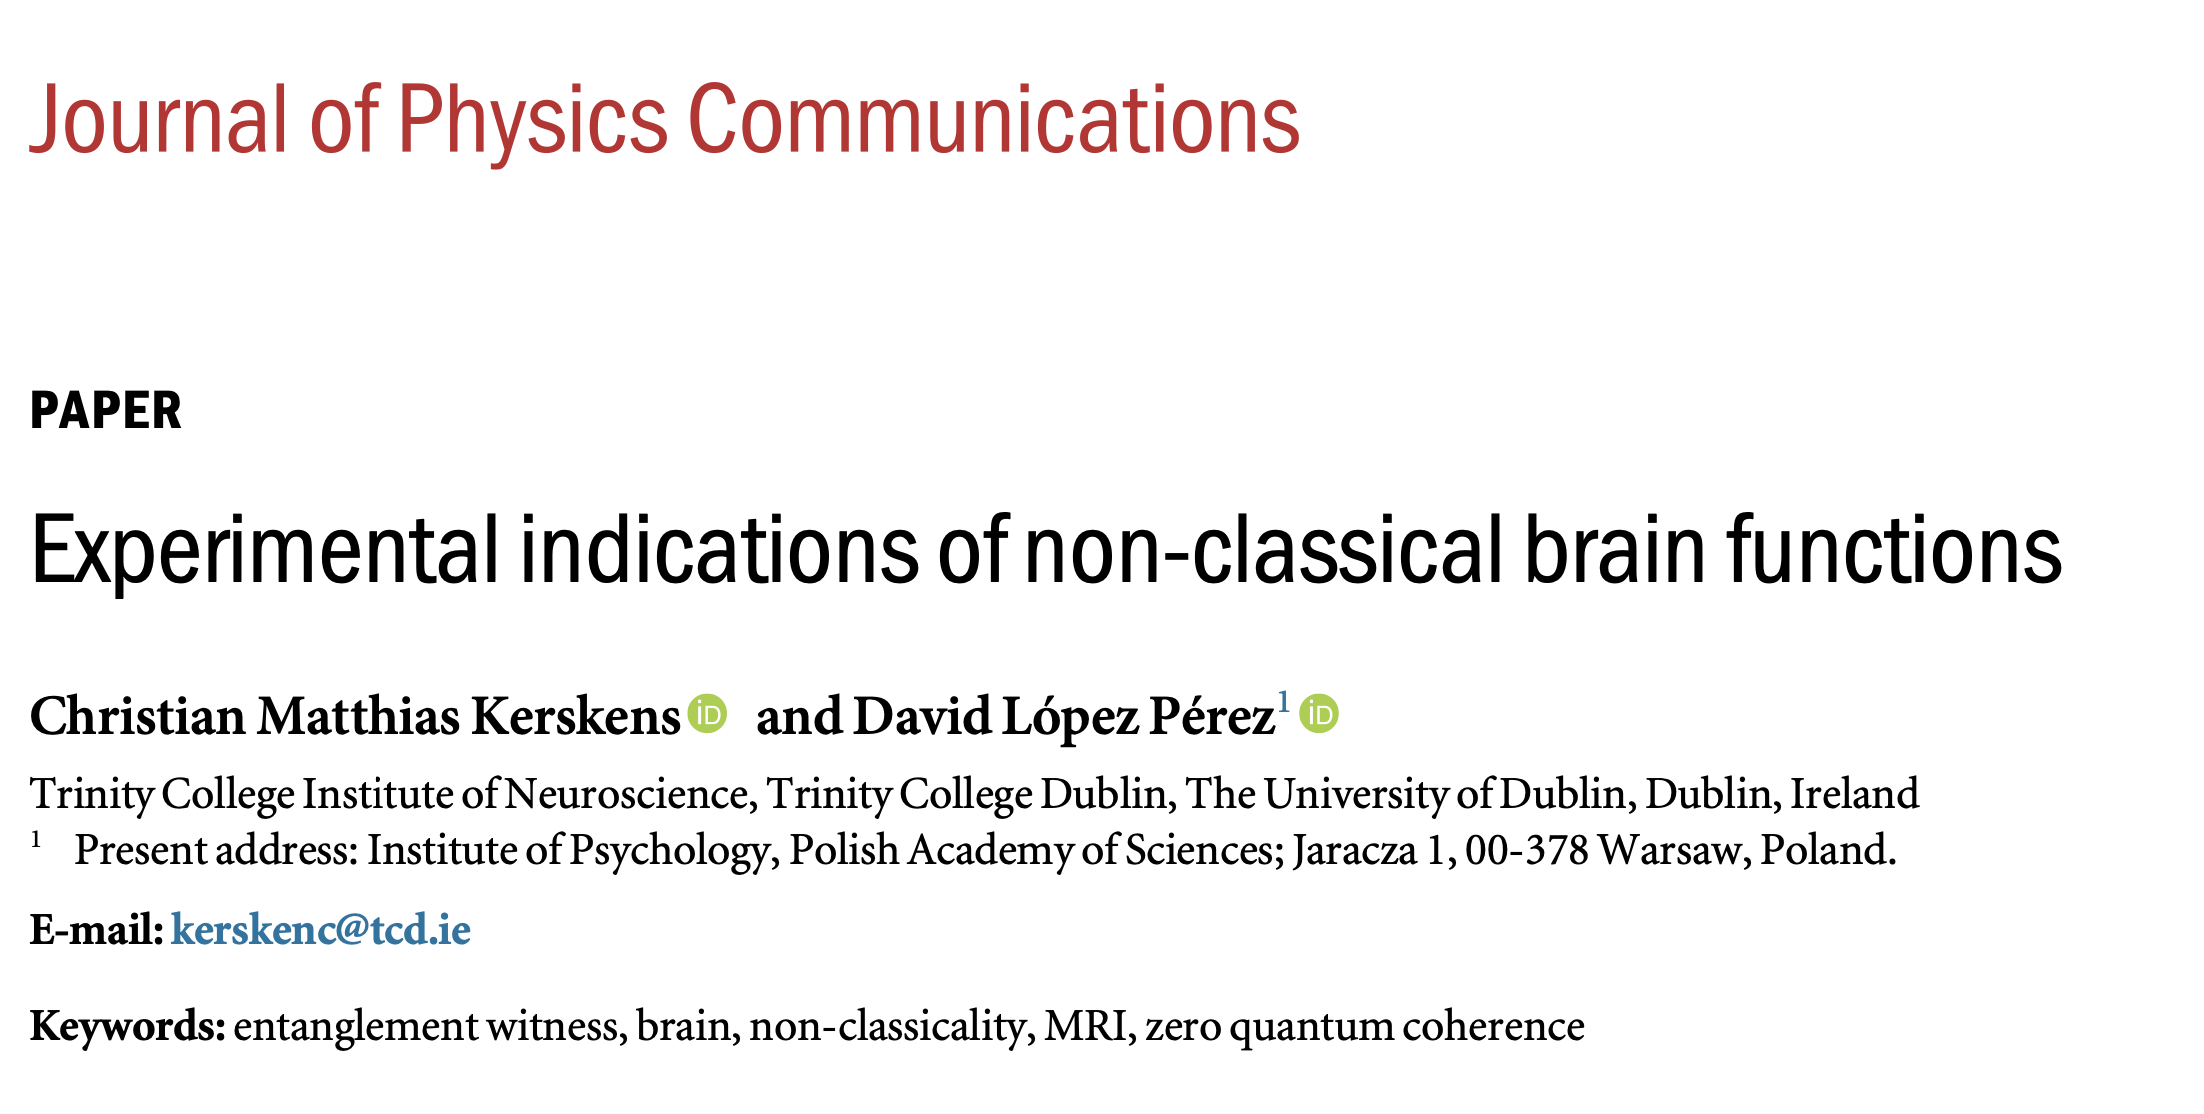 Experimental indications of non-classical brain functions